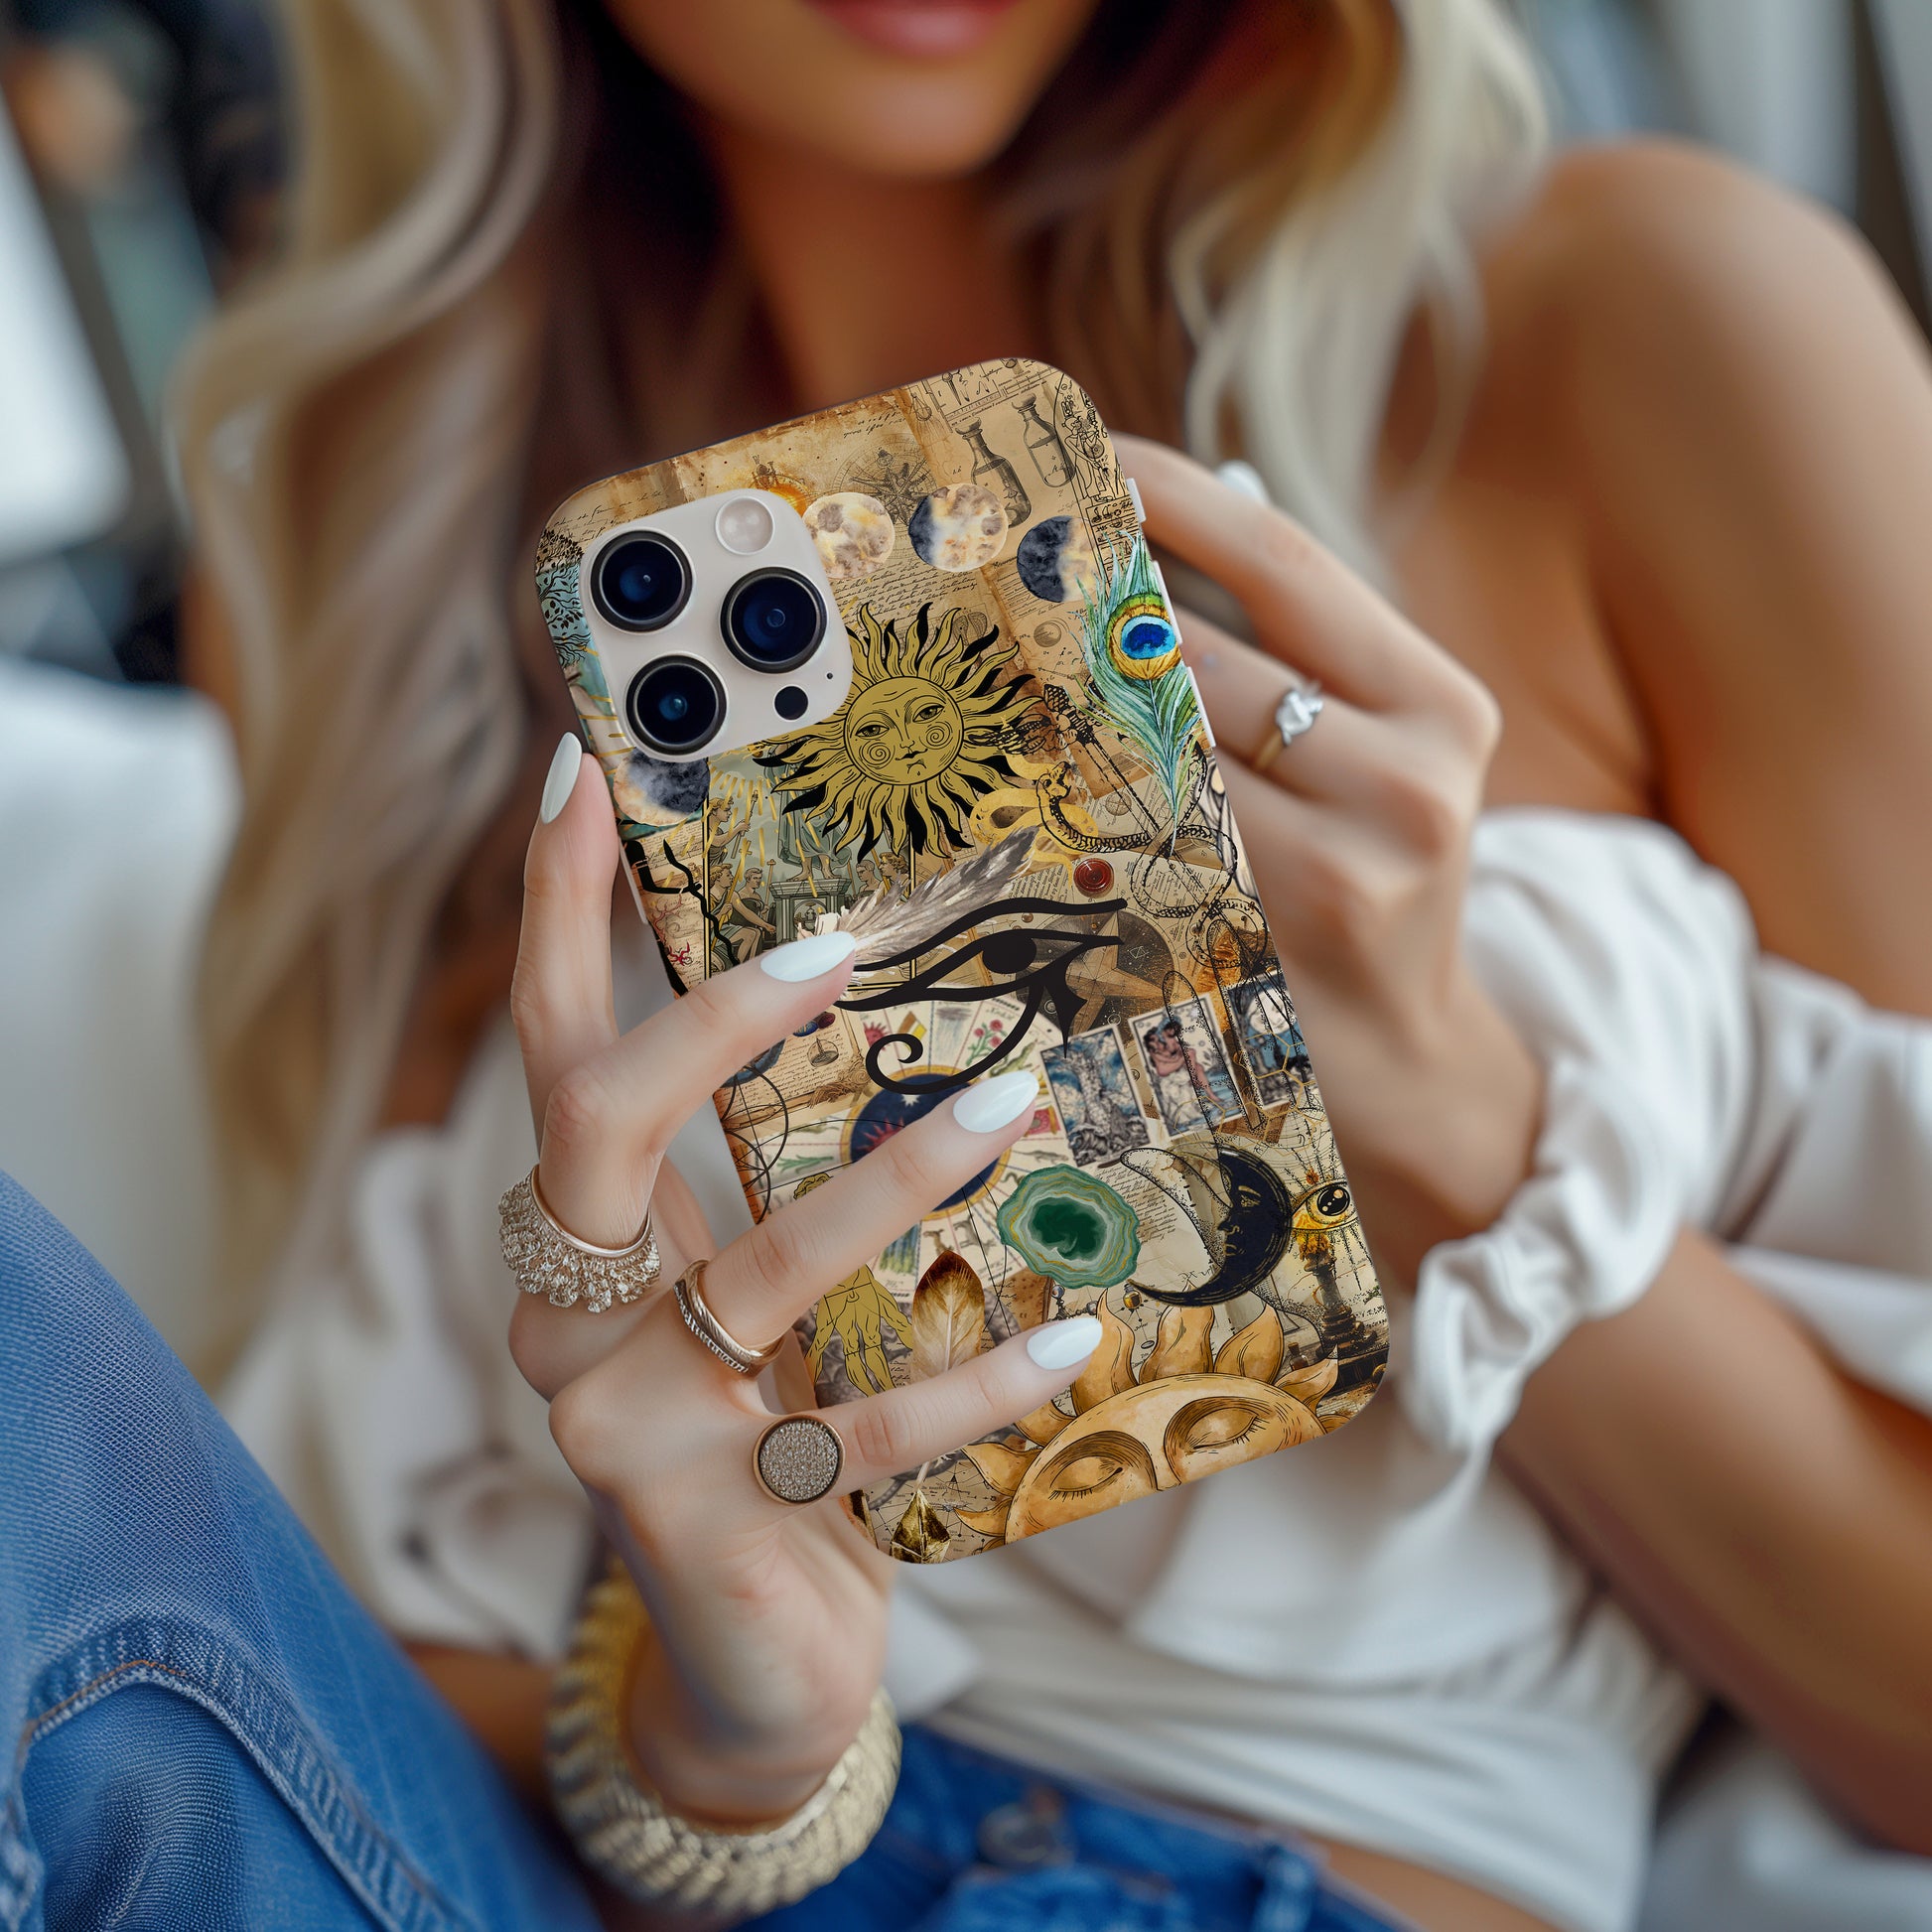 girl holding mystical collage phone case by Artscape Market filled with celestial astrology tarot and alchemical images in watercolor scrapbook collage style